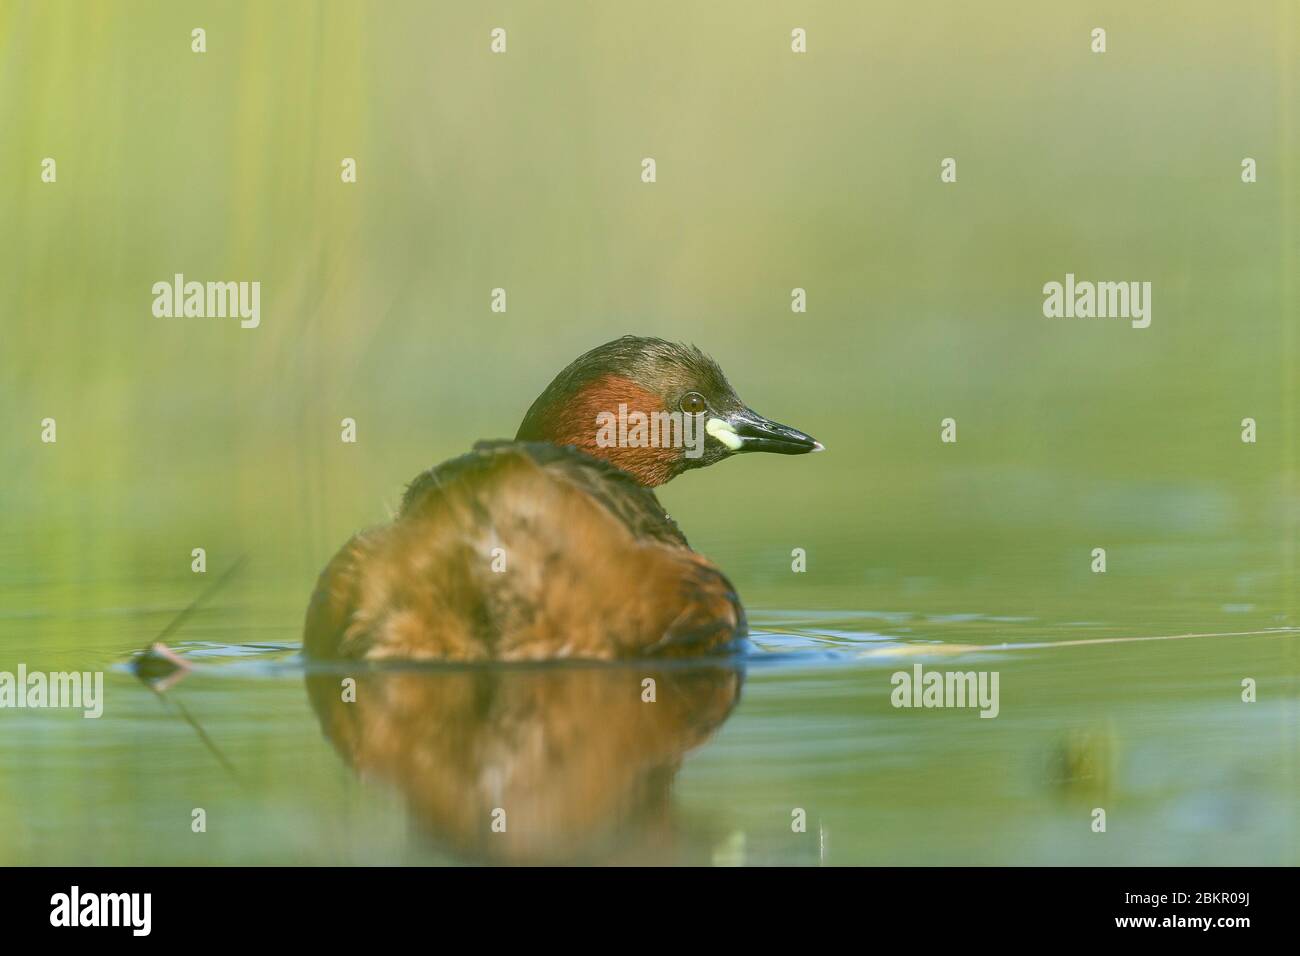 A Little grebe (Tachybaptus ruficollis) amongst the reeds in early morning mist Stock Photo